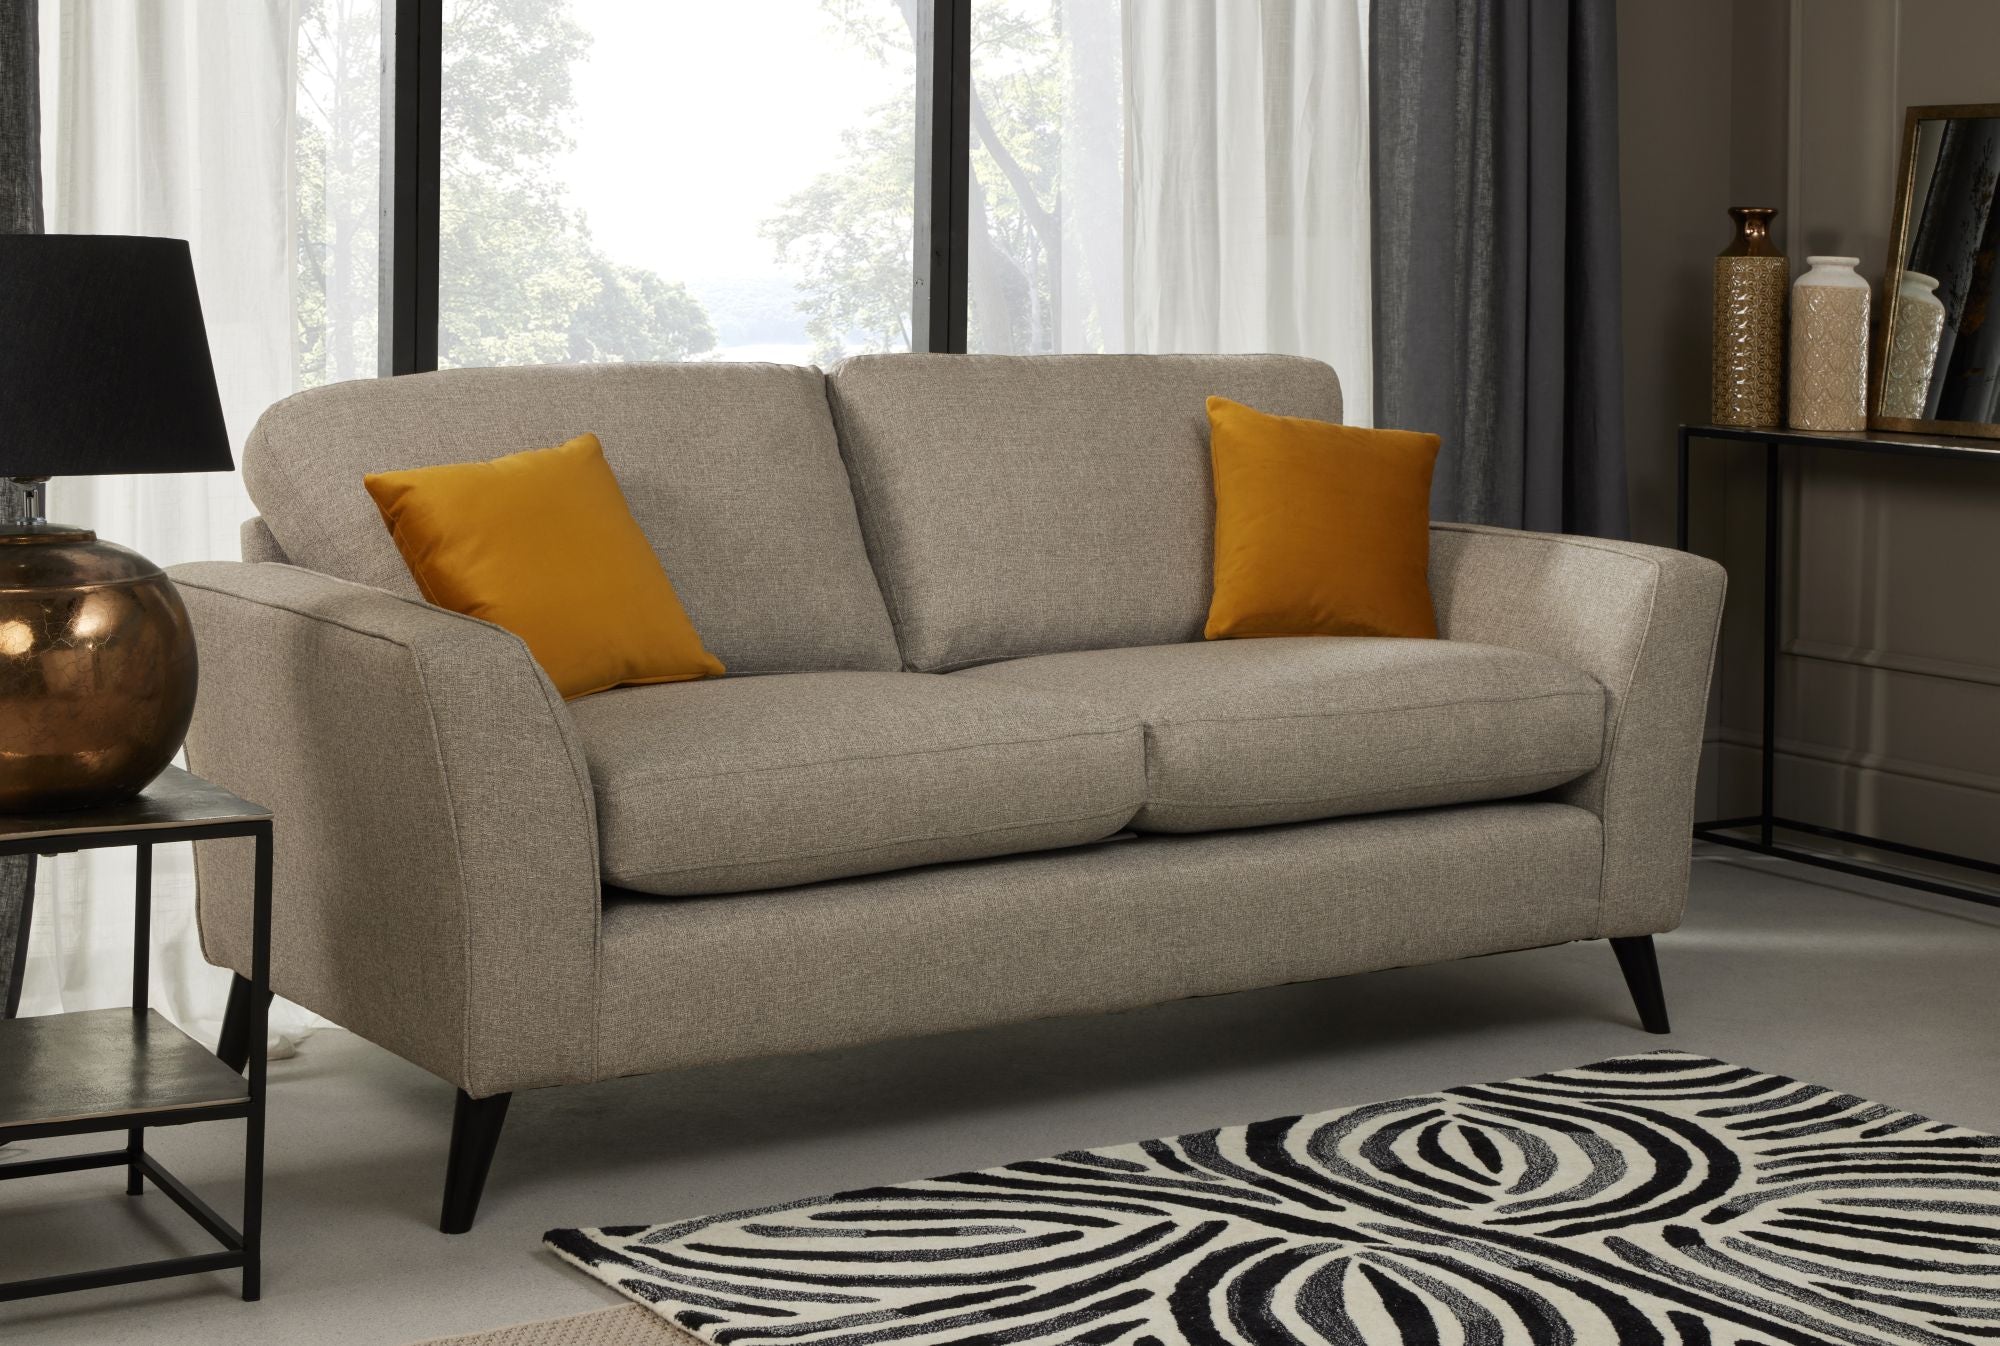 Libby 3 seater in Oatmeal shown in a room setting 